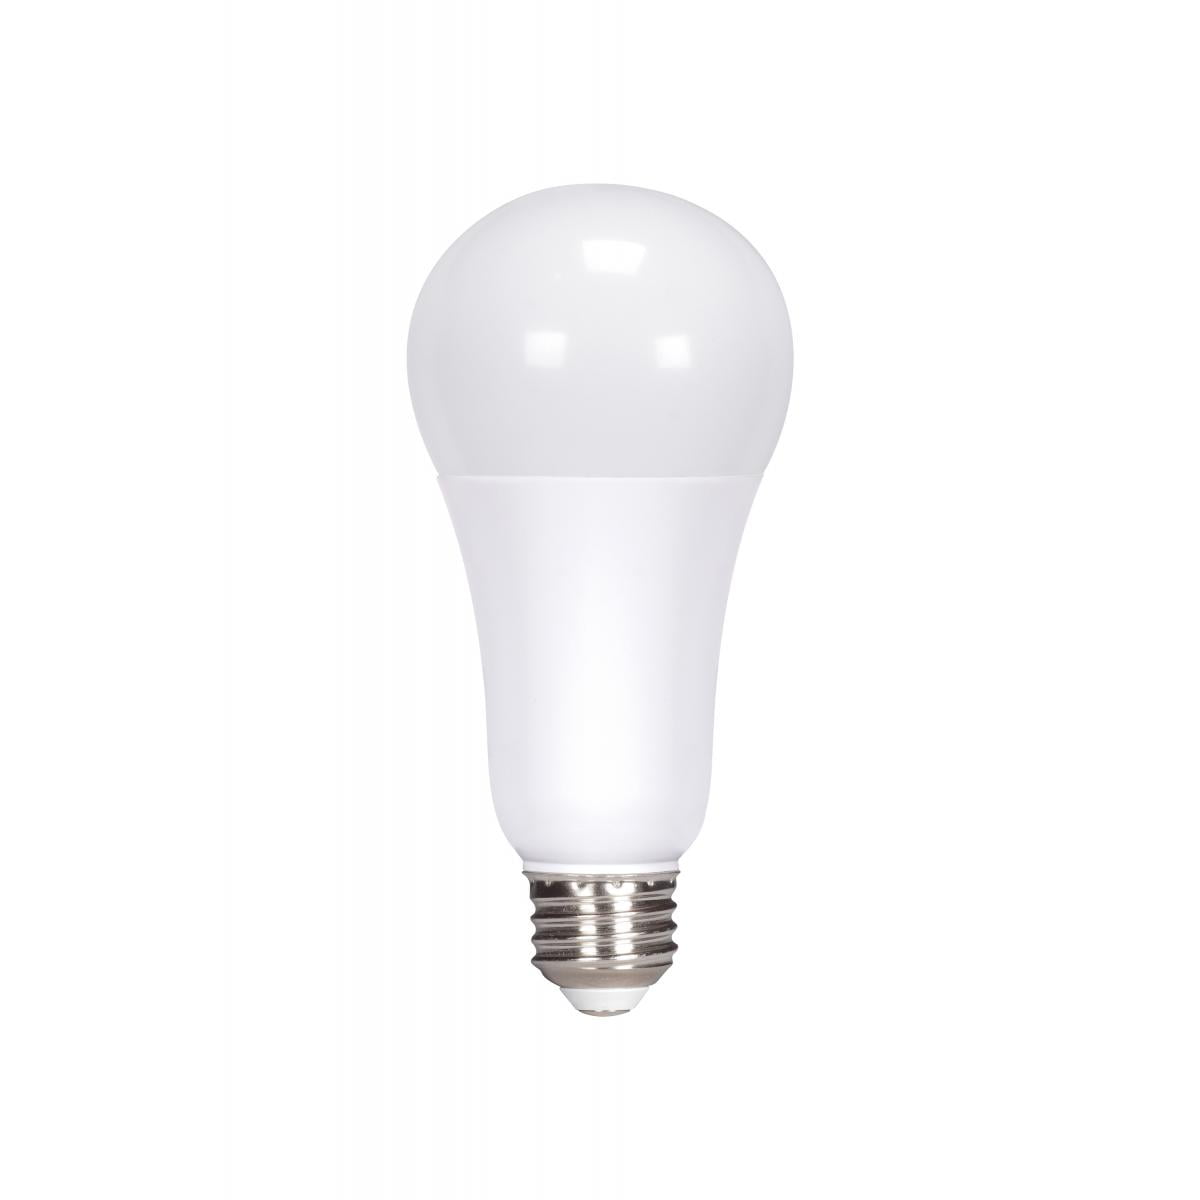 Enclosed Rated 120-277 Volt 3000K A-19 LED Bulb Satco Non-Dimmable 8.5 Watt